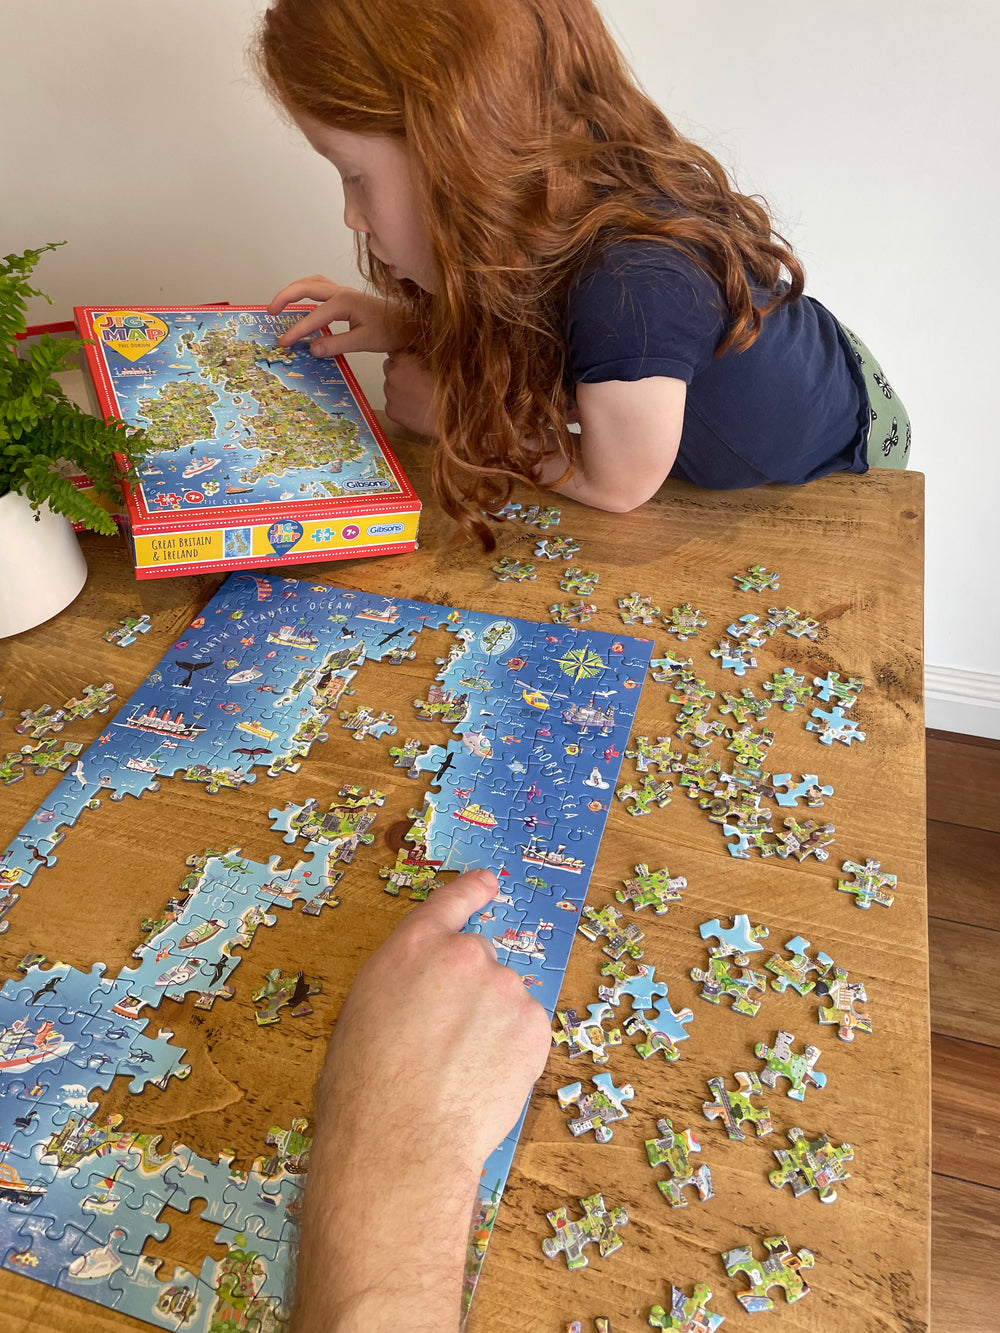 Gibsons - JigMap Great Britain and Ireland - 250 Piece Jigsaw Puzzle